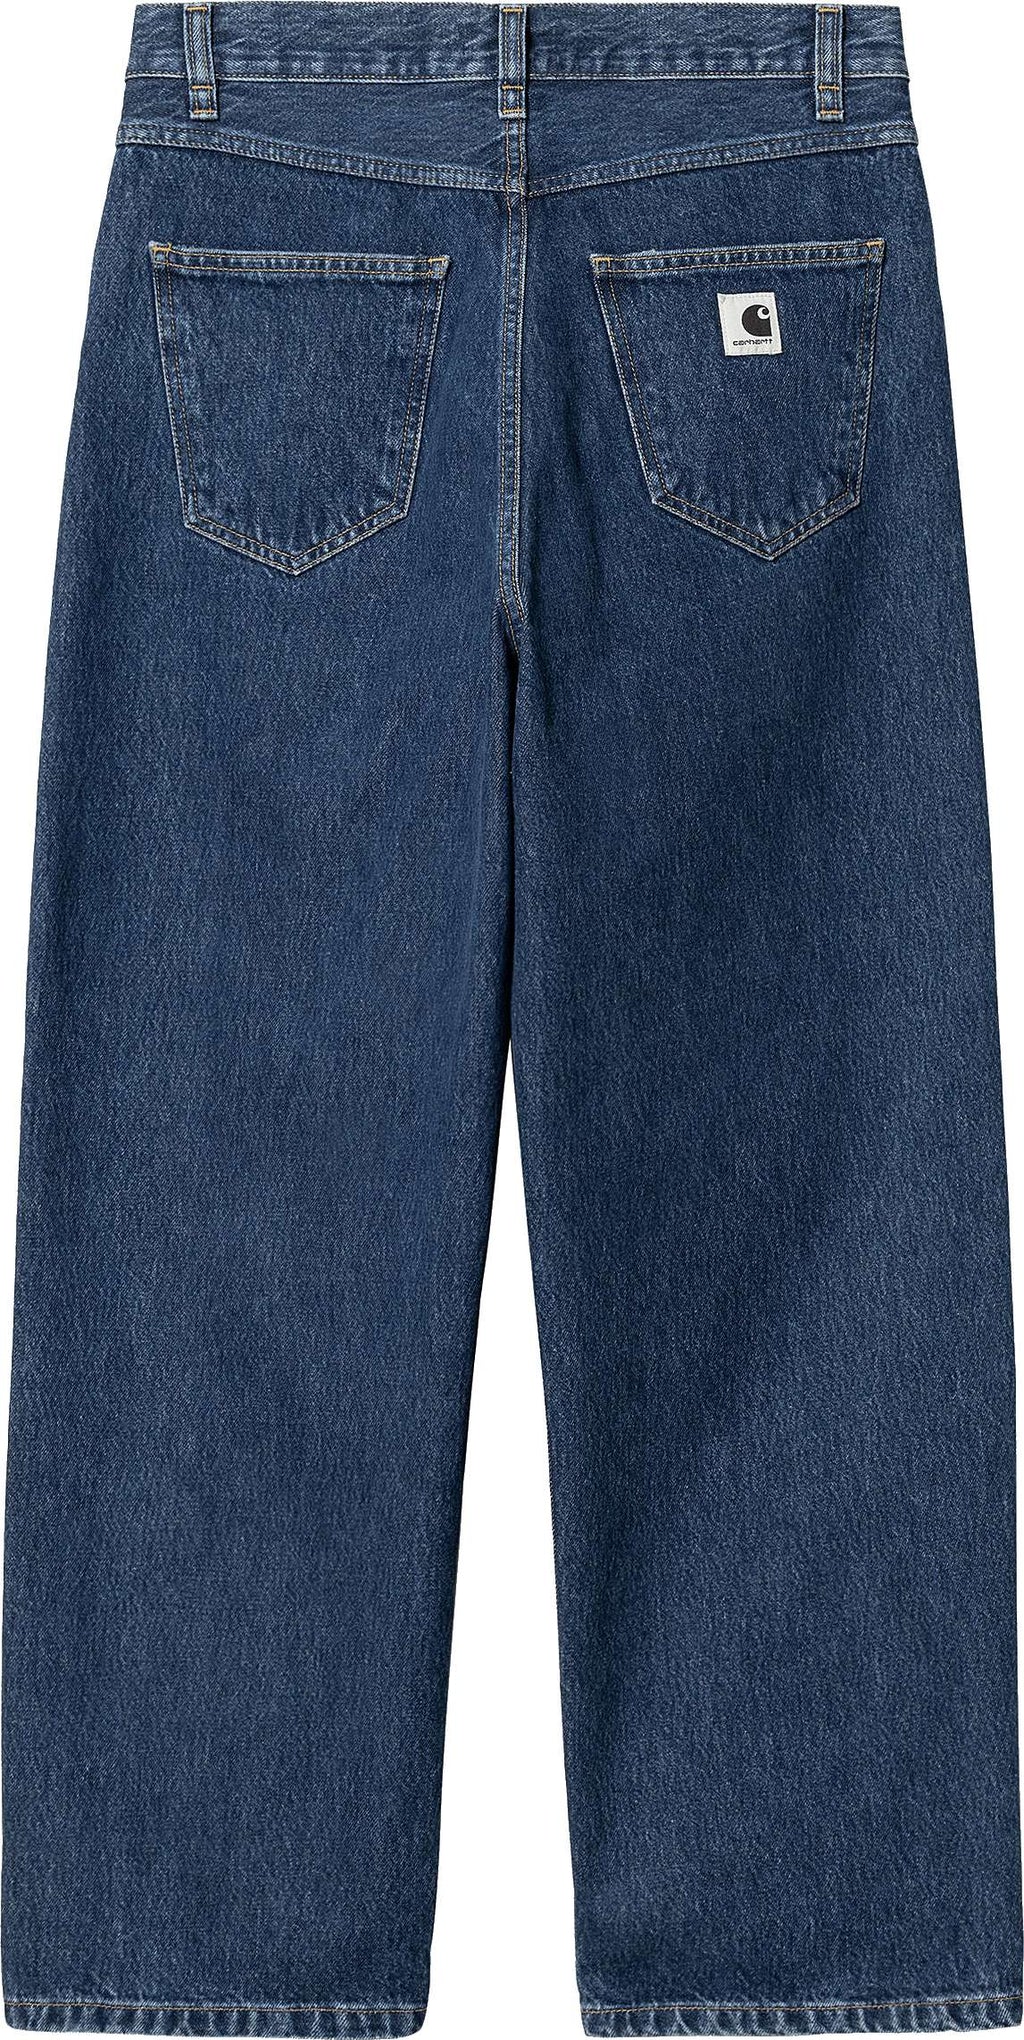  Carhartt Wip Jeans W Brandon Pant Blue Stone Washed Donna - 2